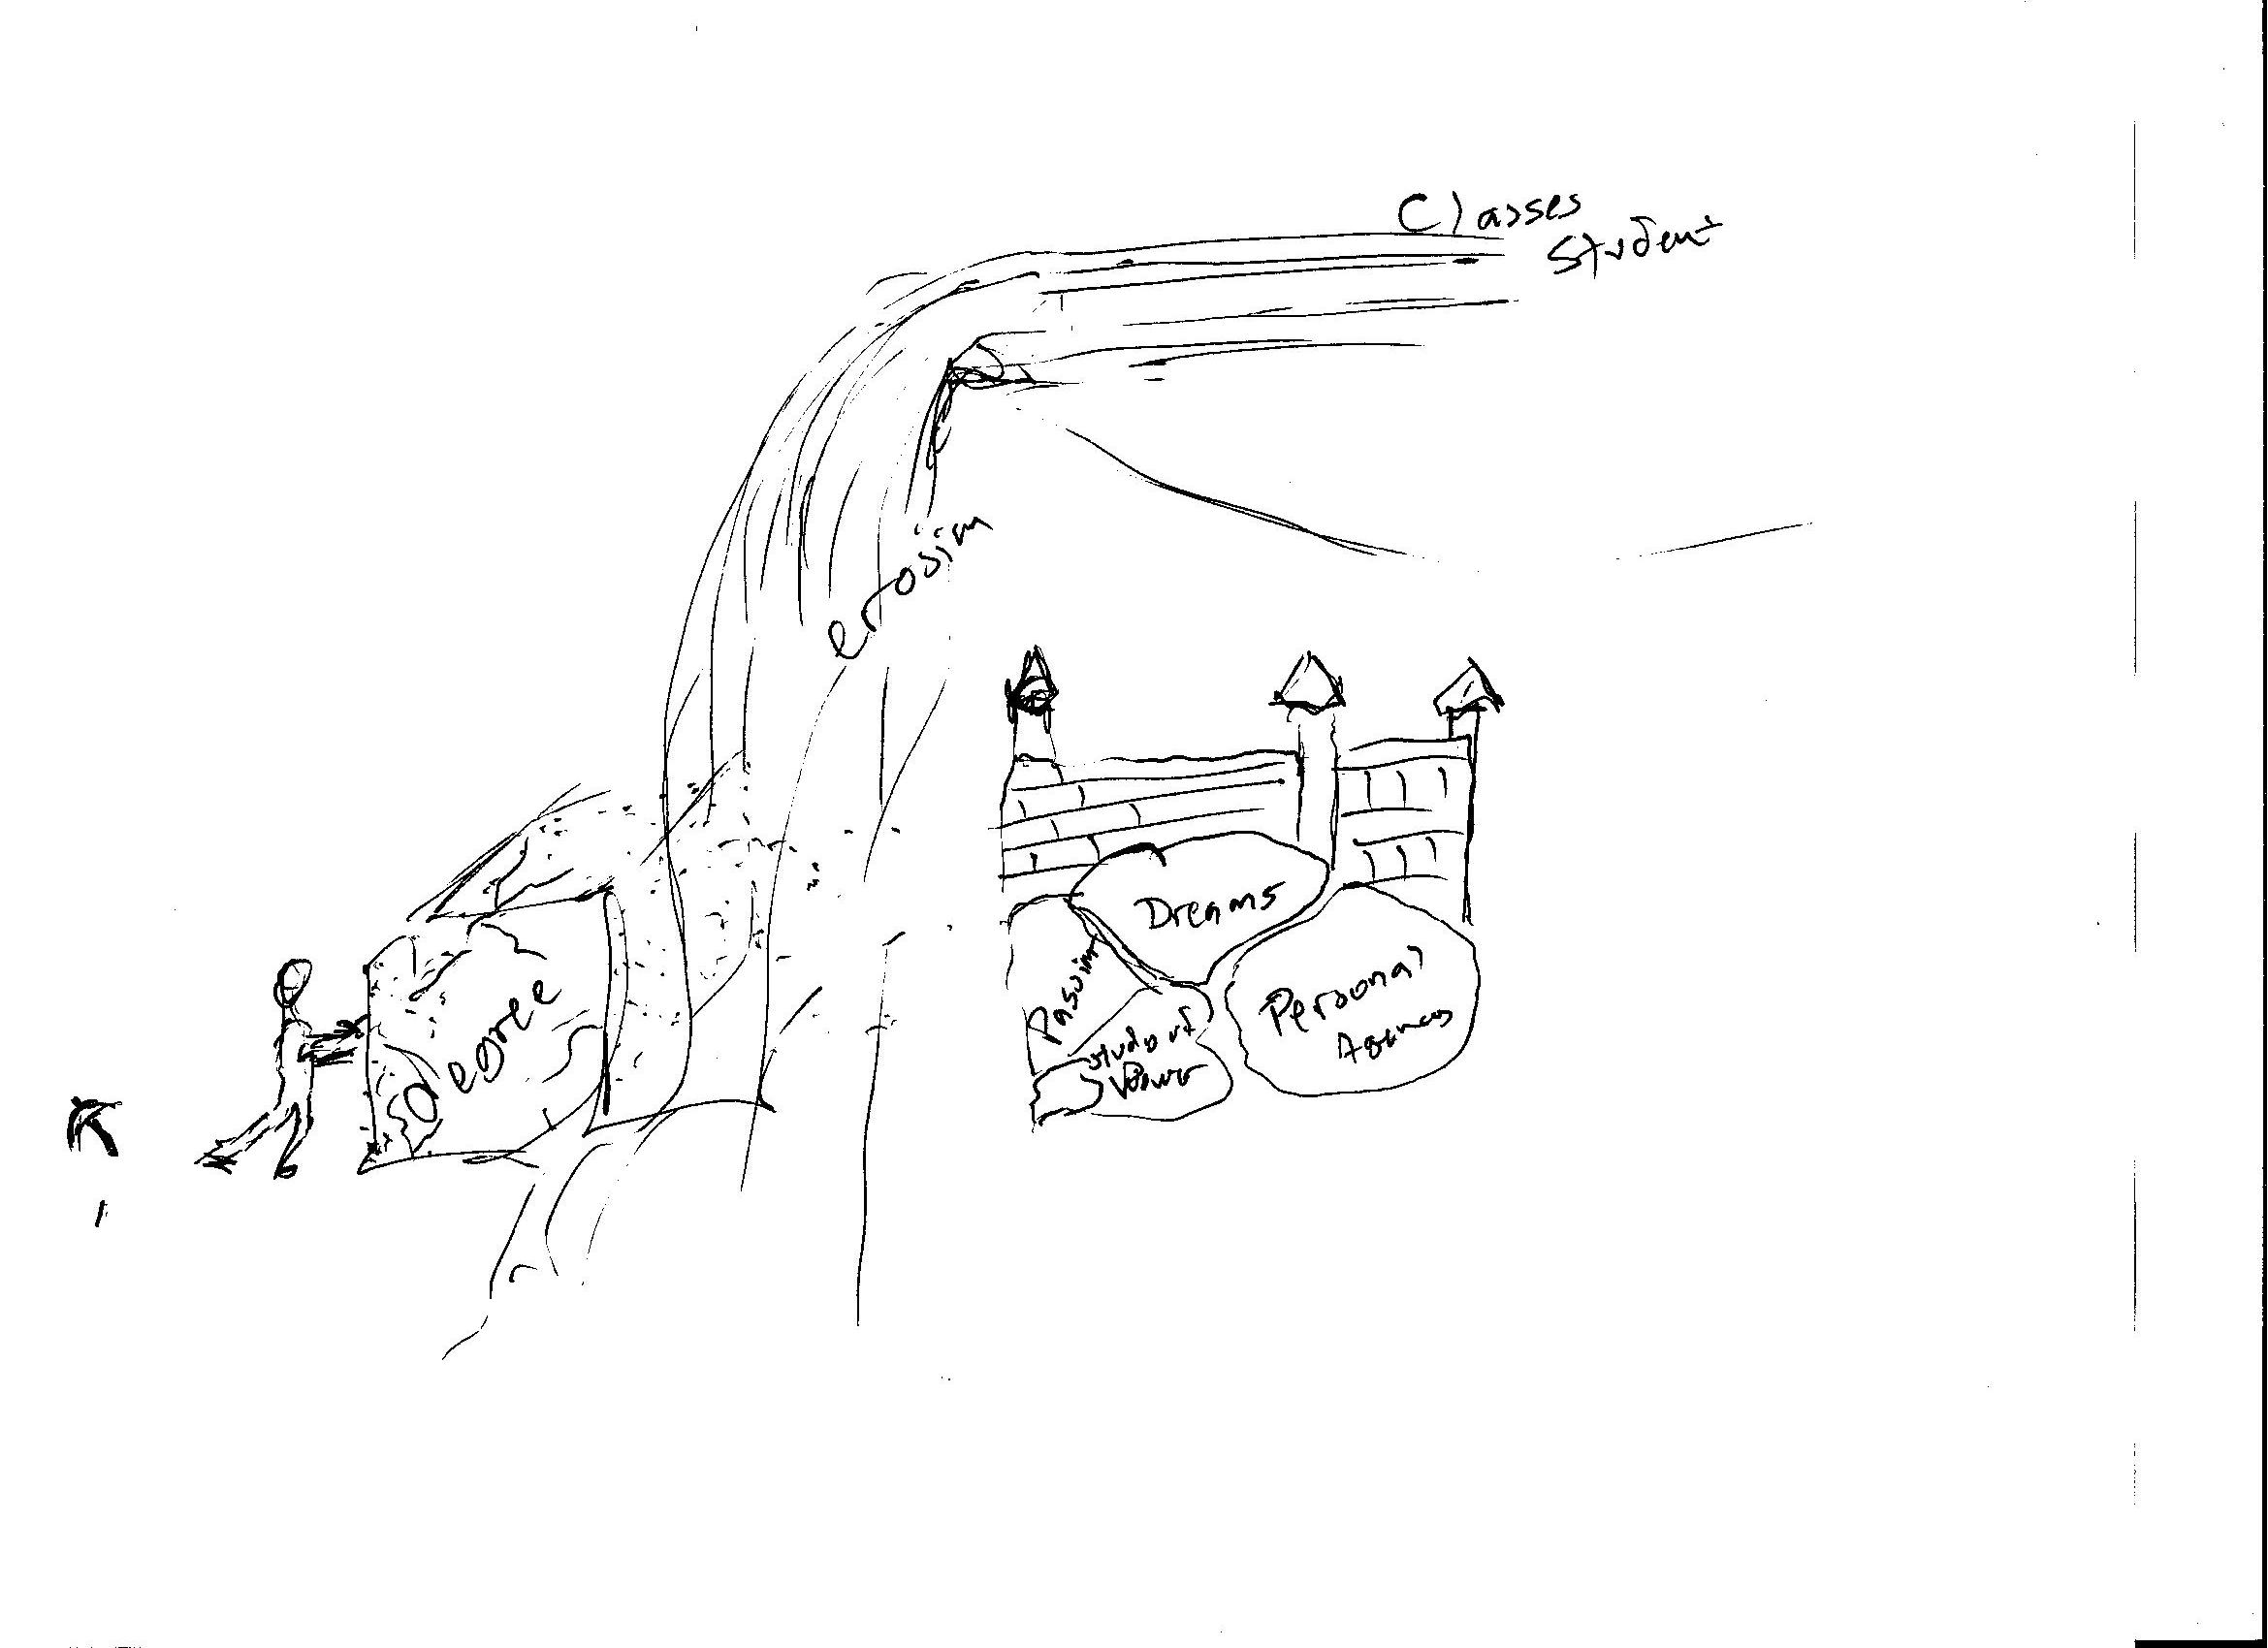 a "life map" drawing showing a person chipping away at a giant stone labeled "Degree."  Beyond the stone is a road or wall with labels along the way of "erosion", "classes" and "student".  There is also a castle with rooms labeled Dreams, Passion, Study of Power, and Personal Agency.